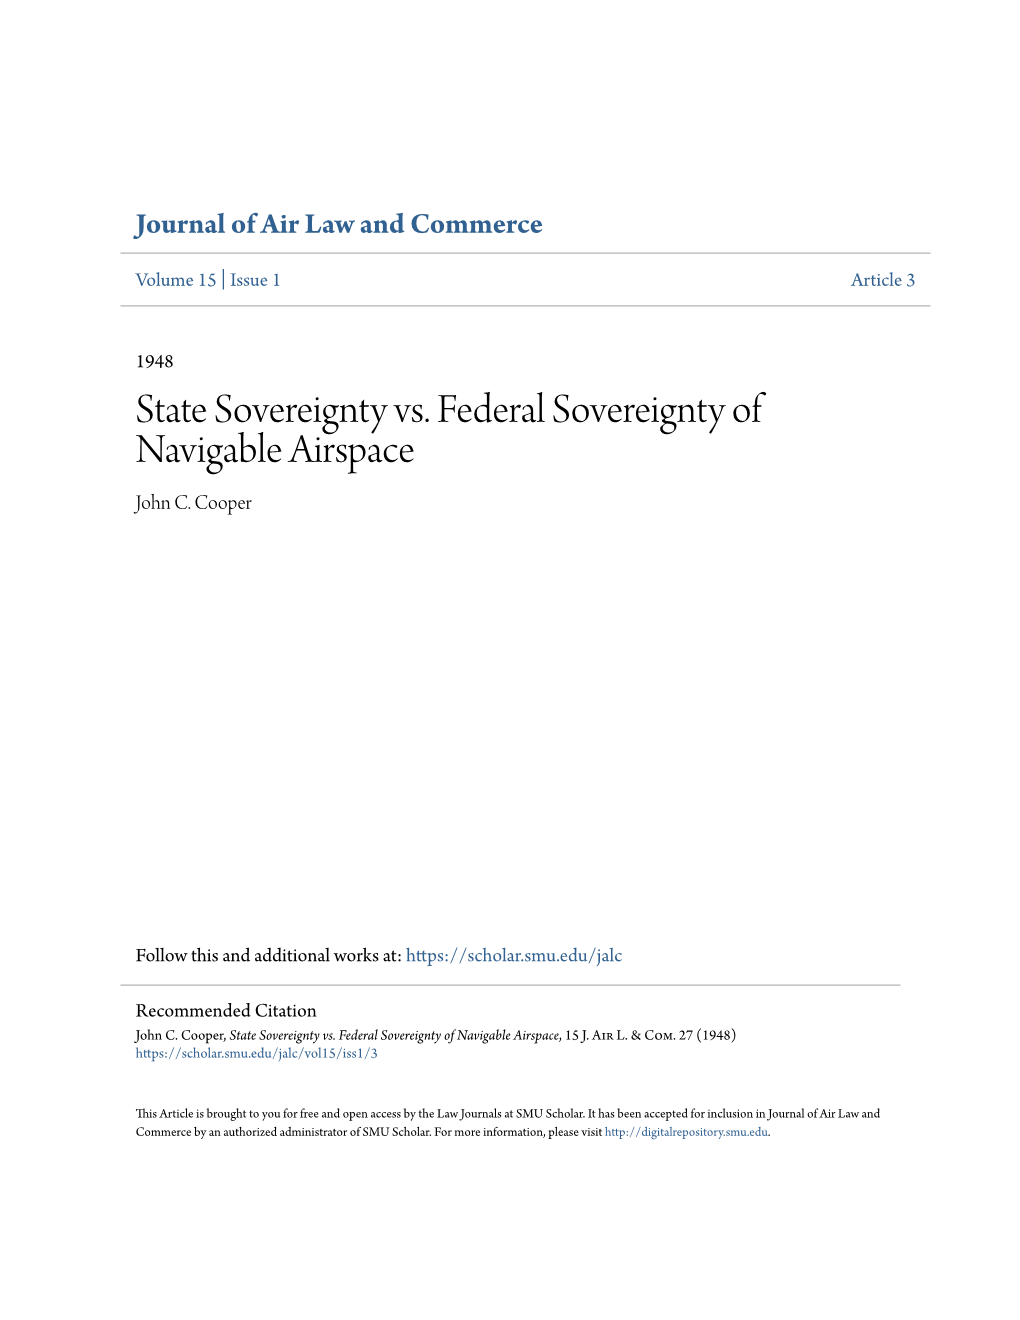 State Sovereignty Vs. Federal Sovereignty of Navigable Airspace John C